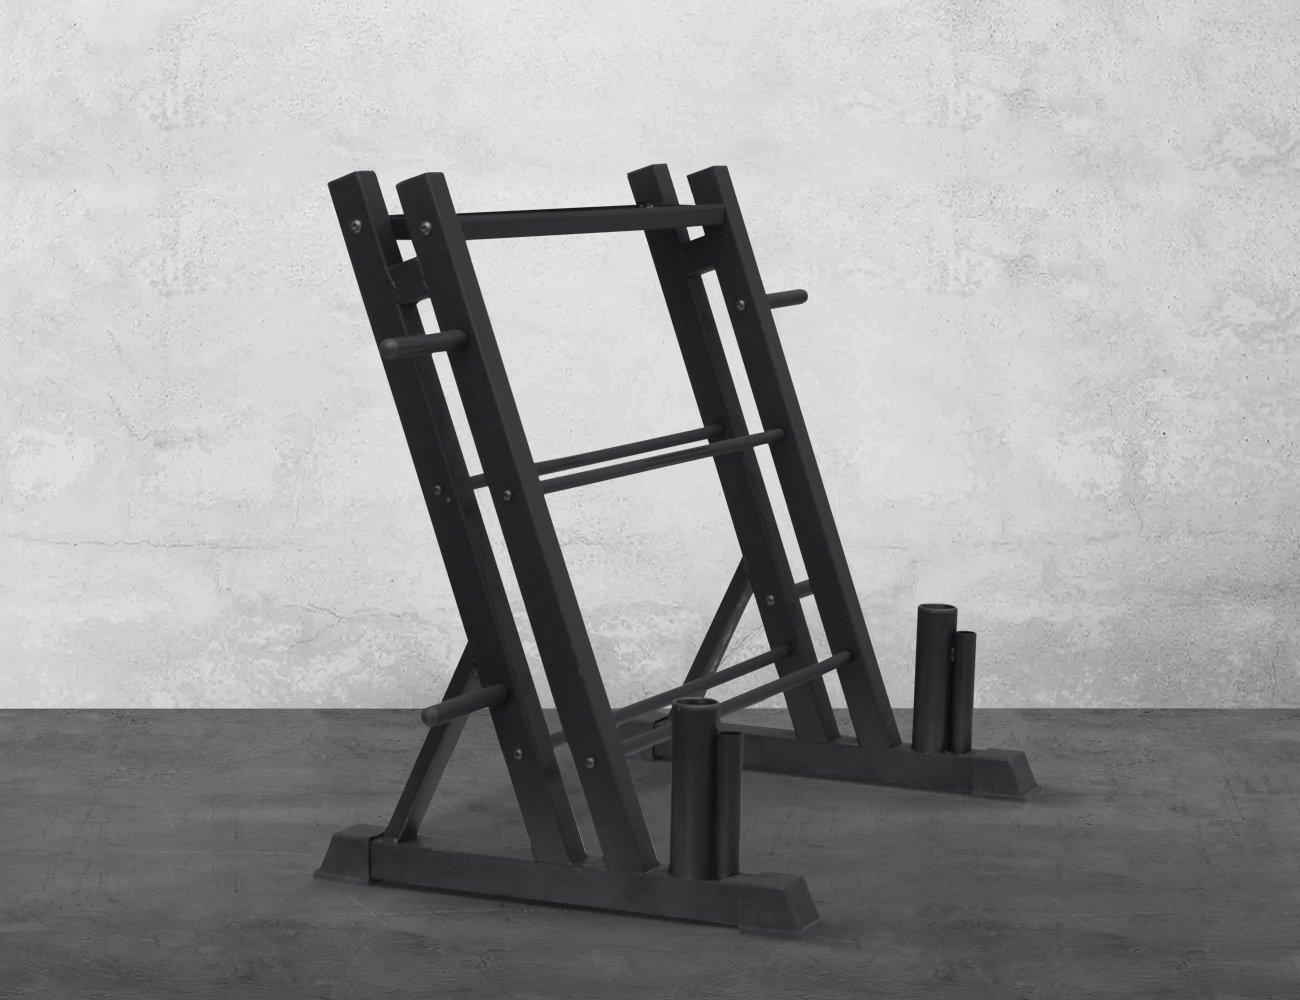 Dumbbell & Weights Storage Rack